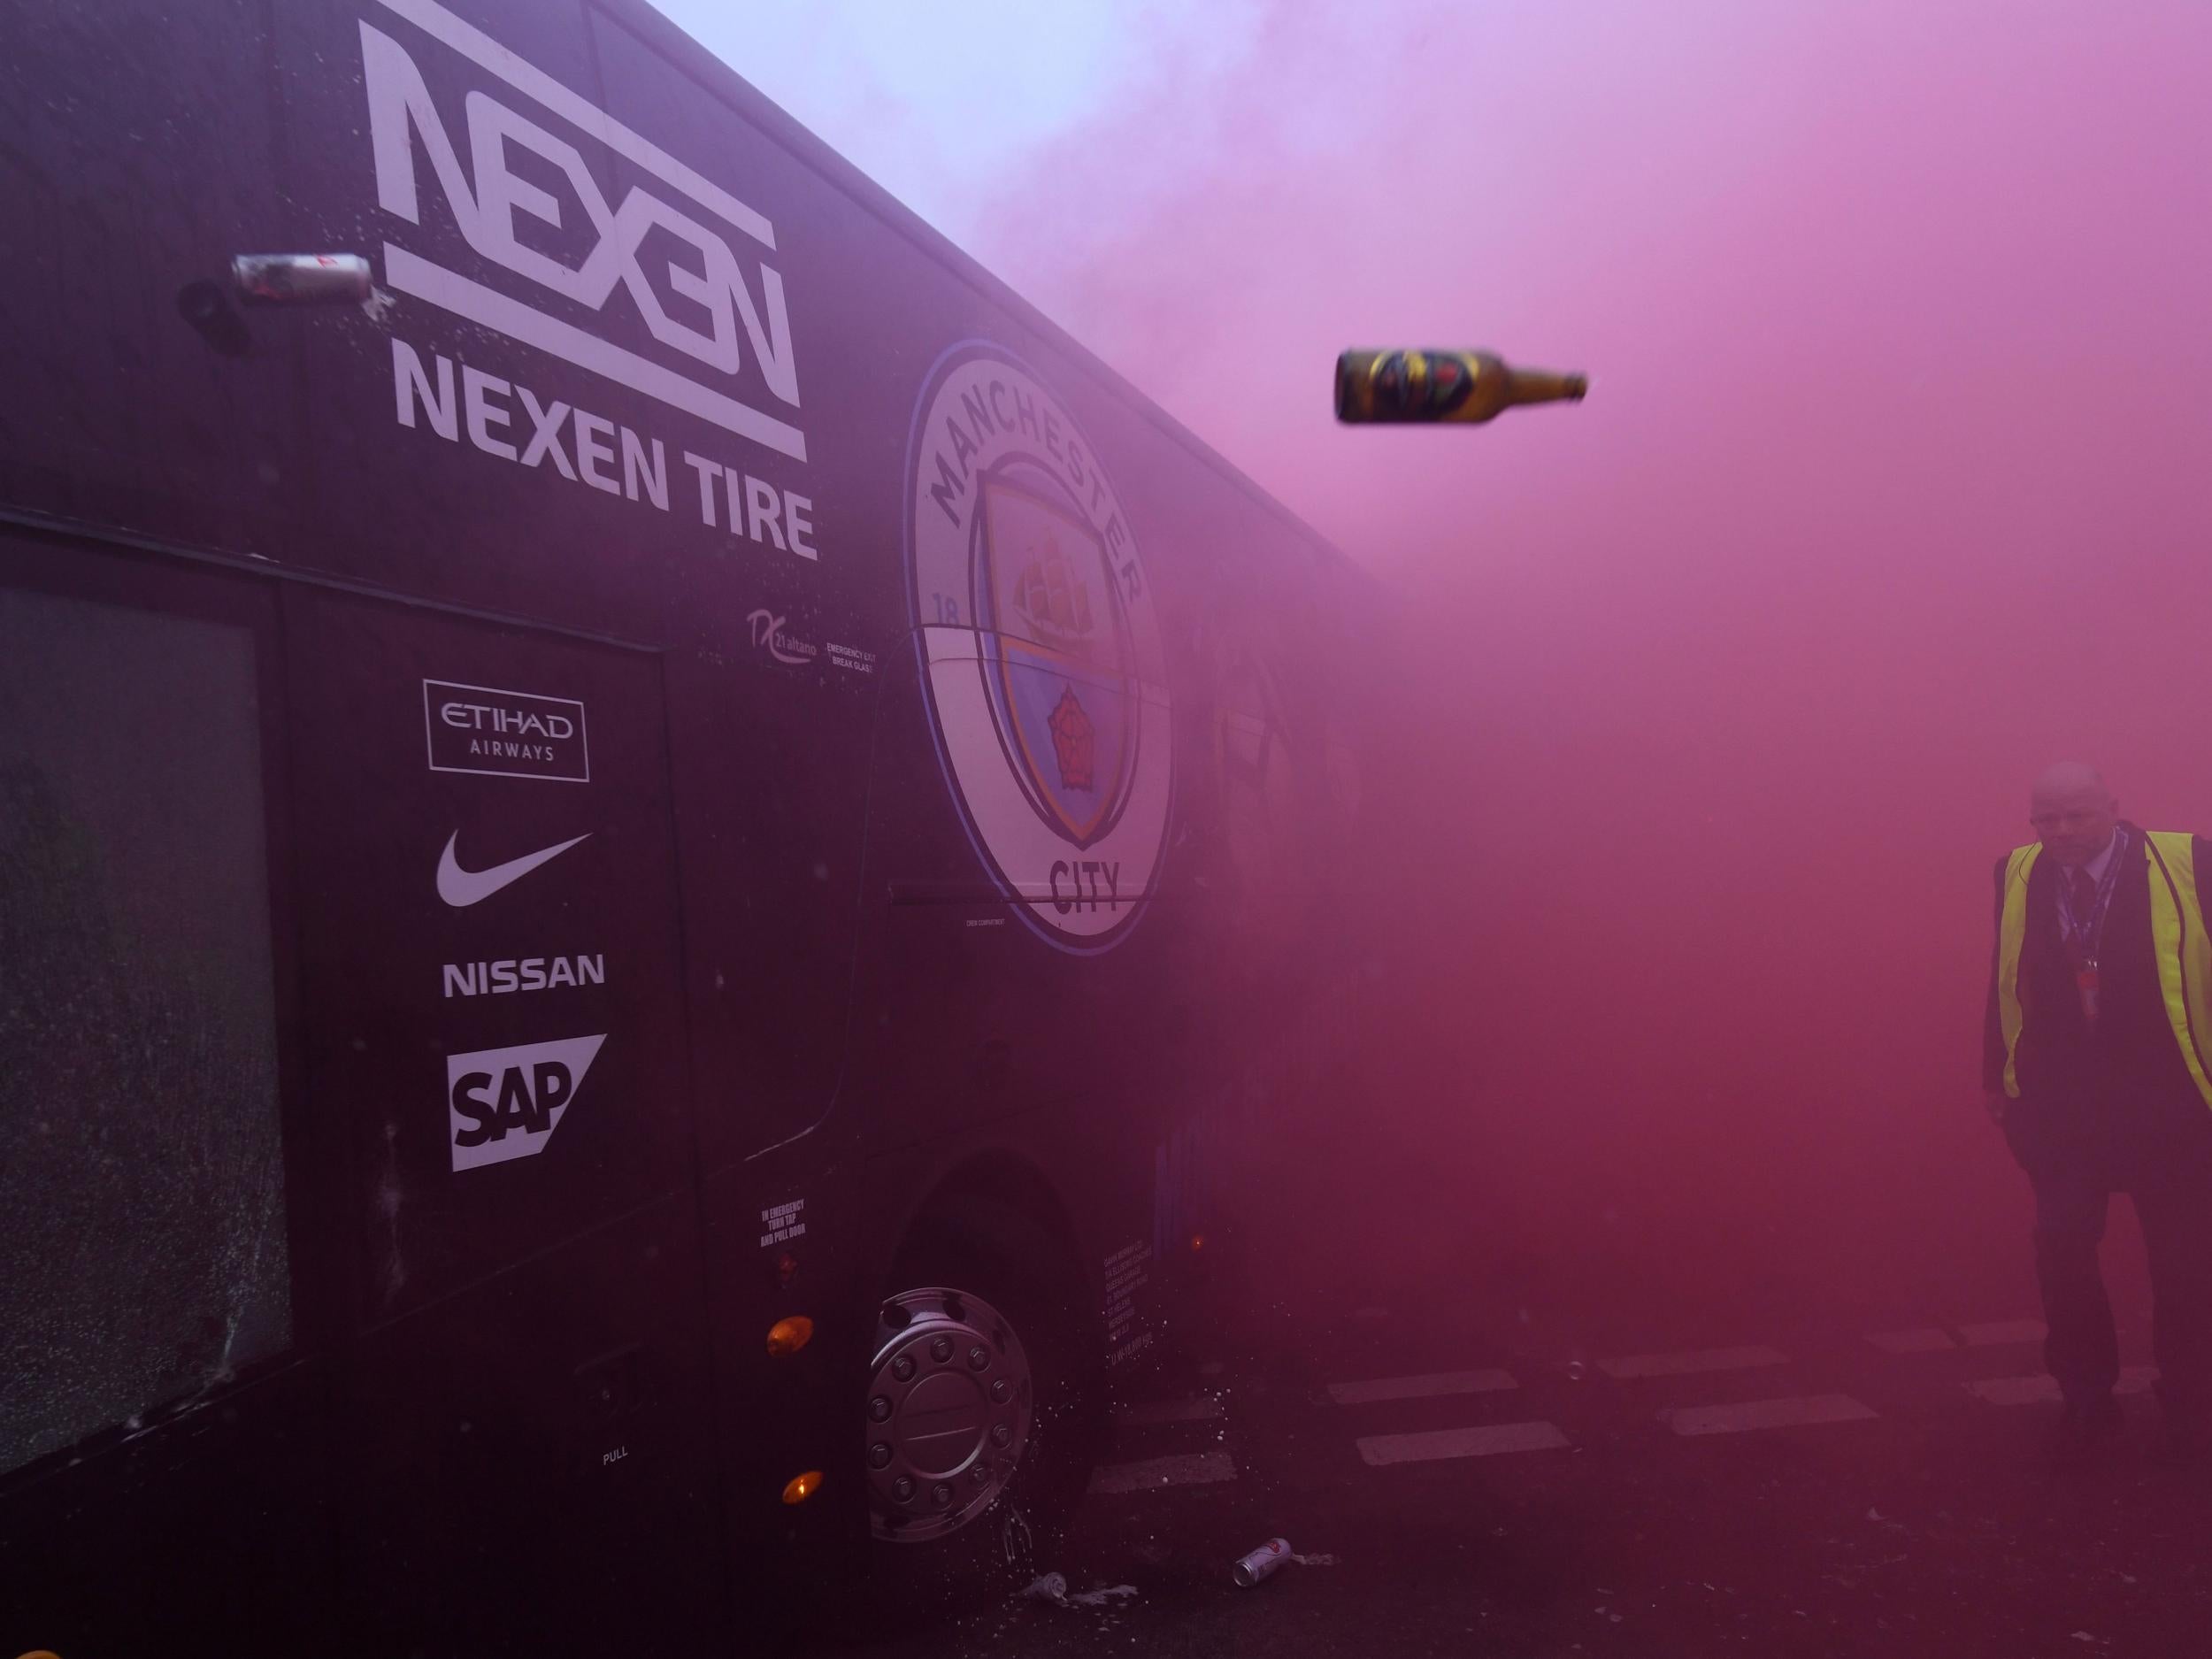 The Manchester City bus was hit by projectiles before kick off